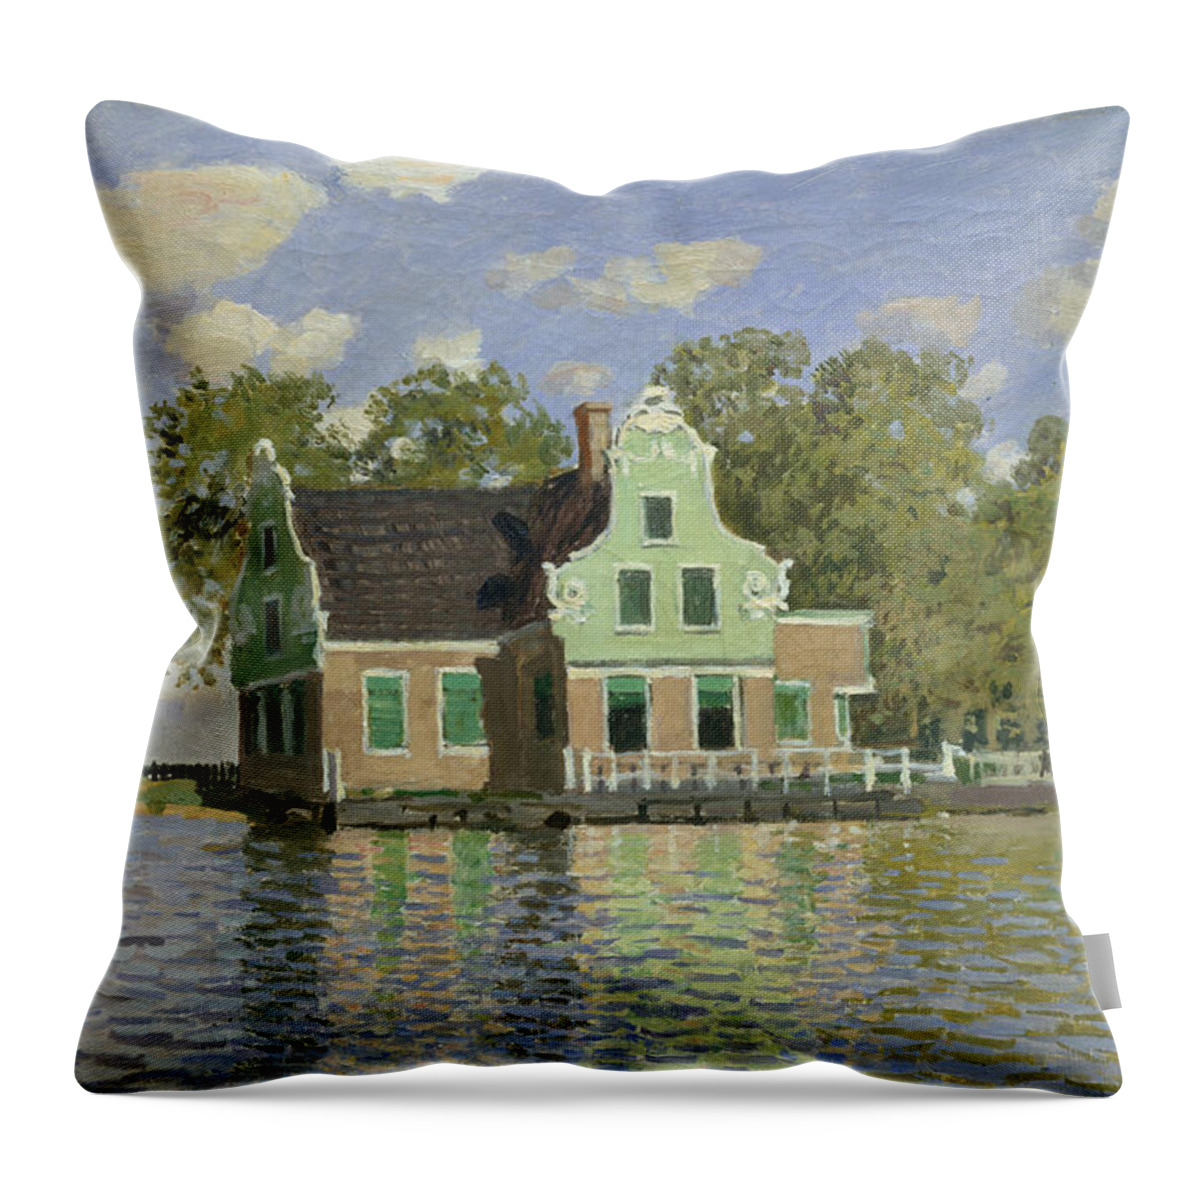 Houses Throw Pillow featuring the painting Houses by the Bank of the River, from 1871 by Claude Monet